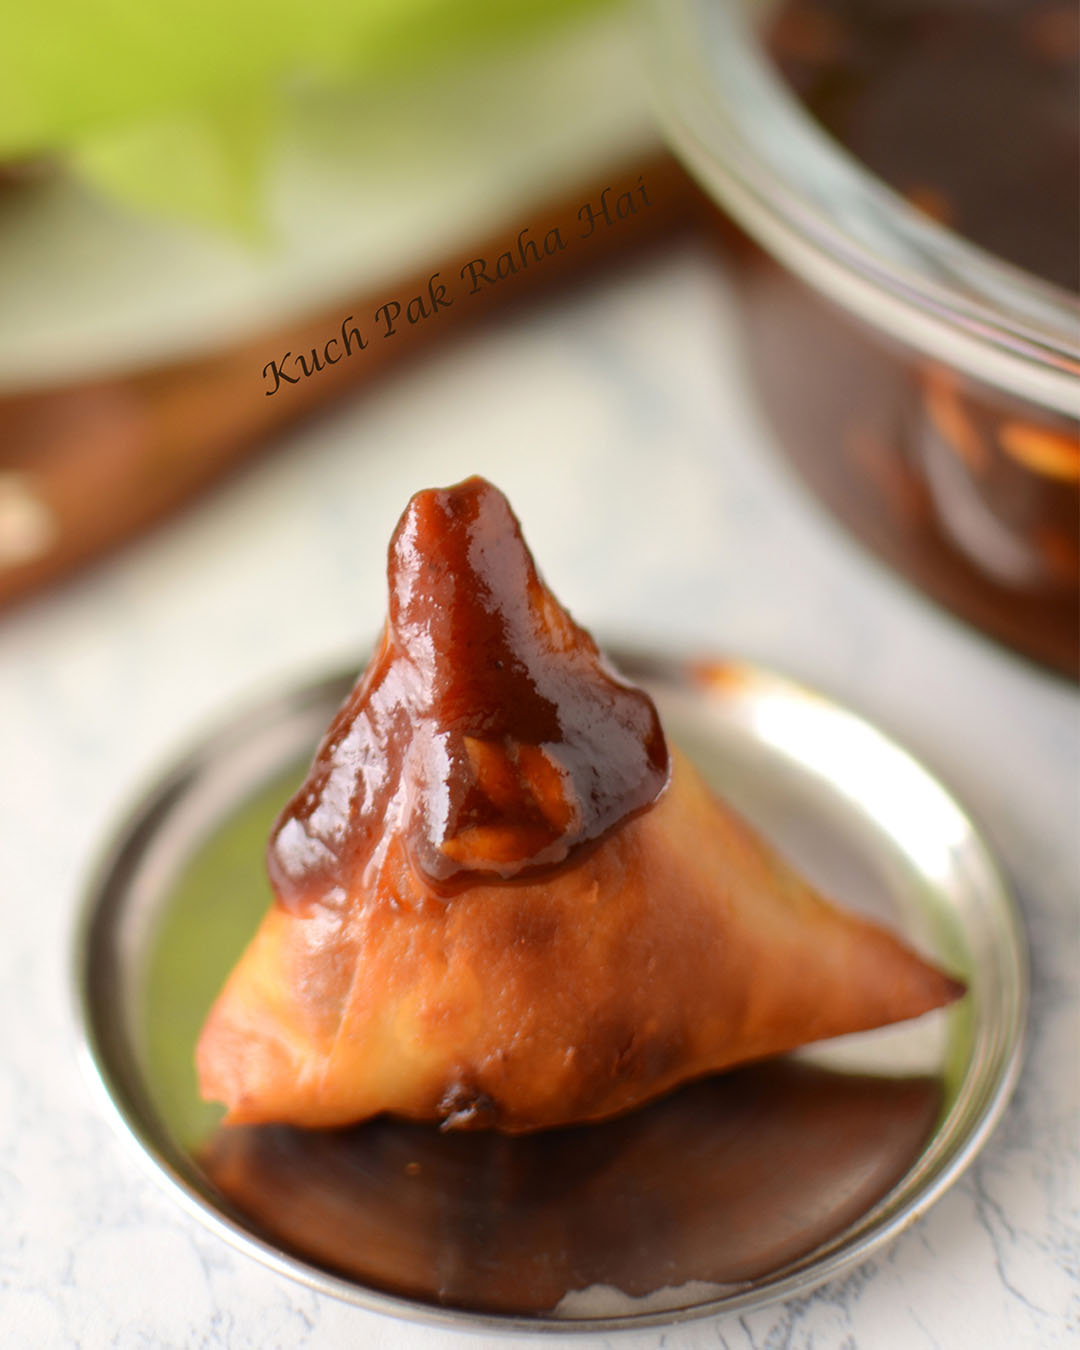 Indian sweet cour tamarind chutney served with samosa